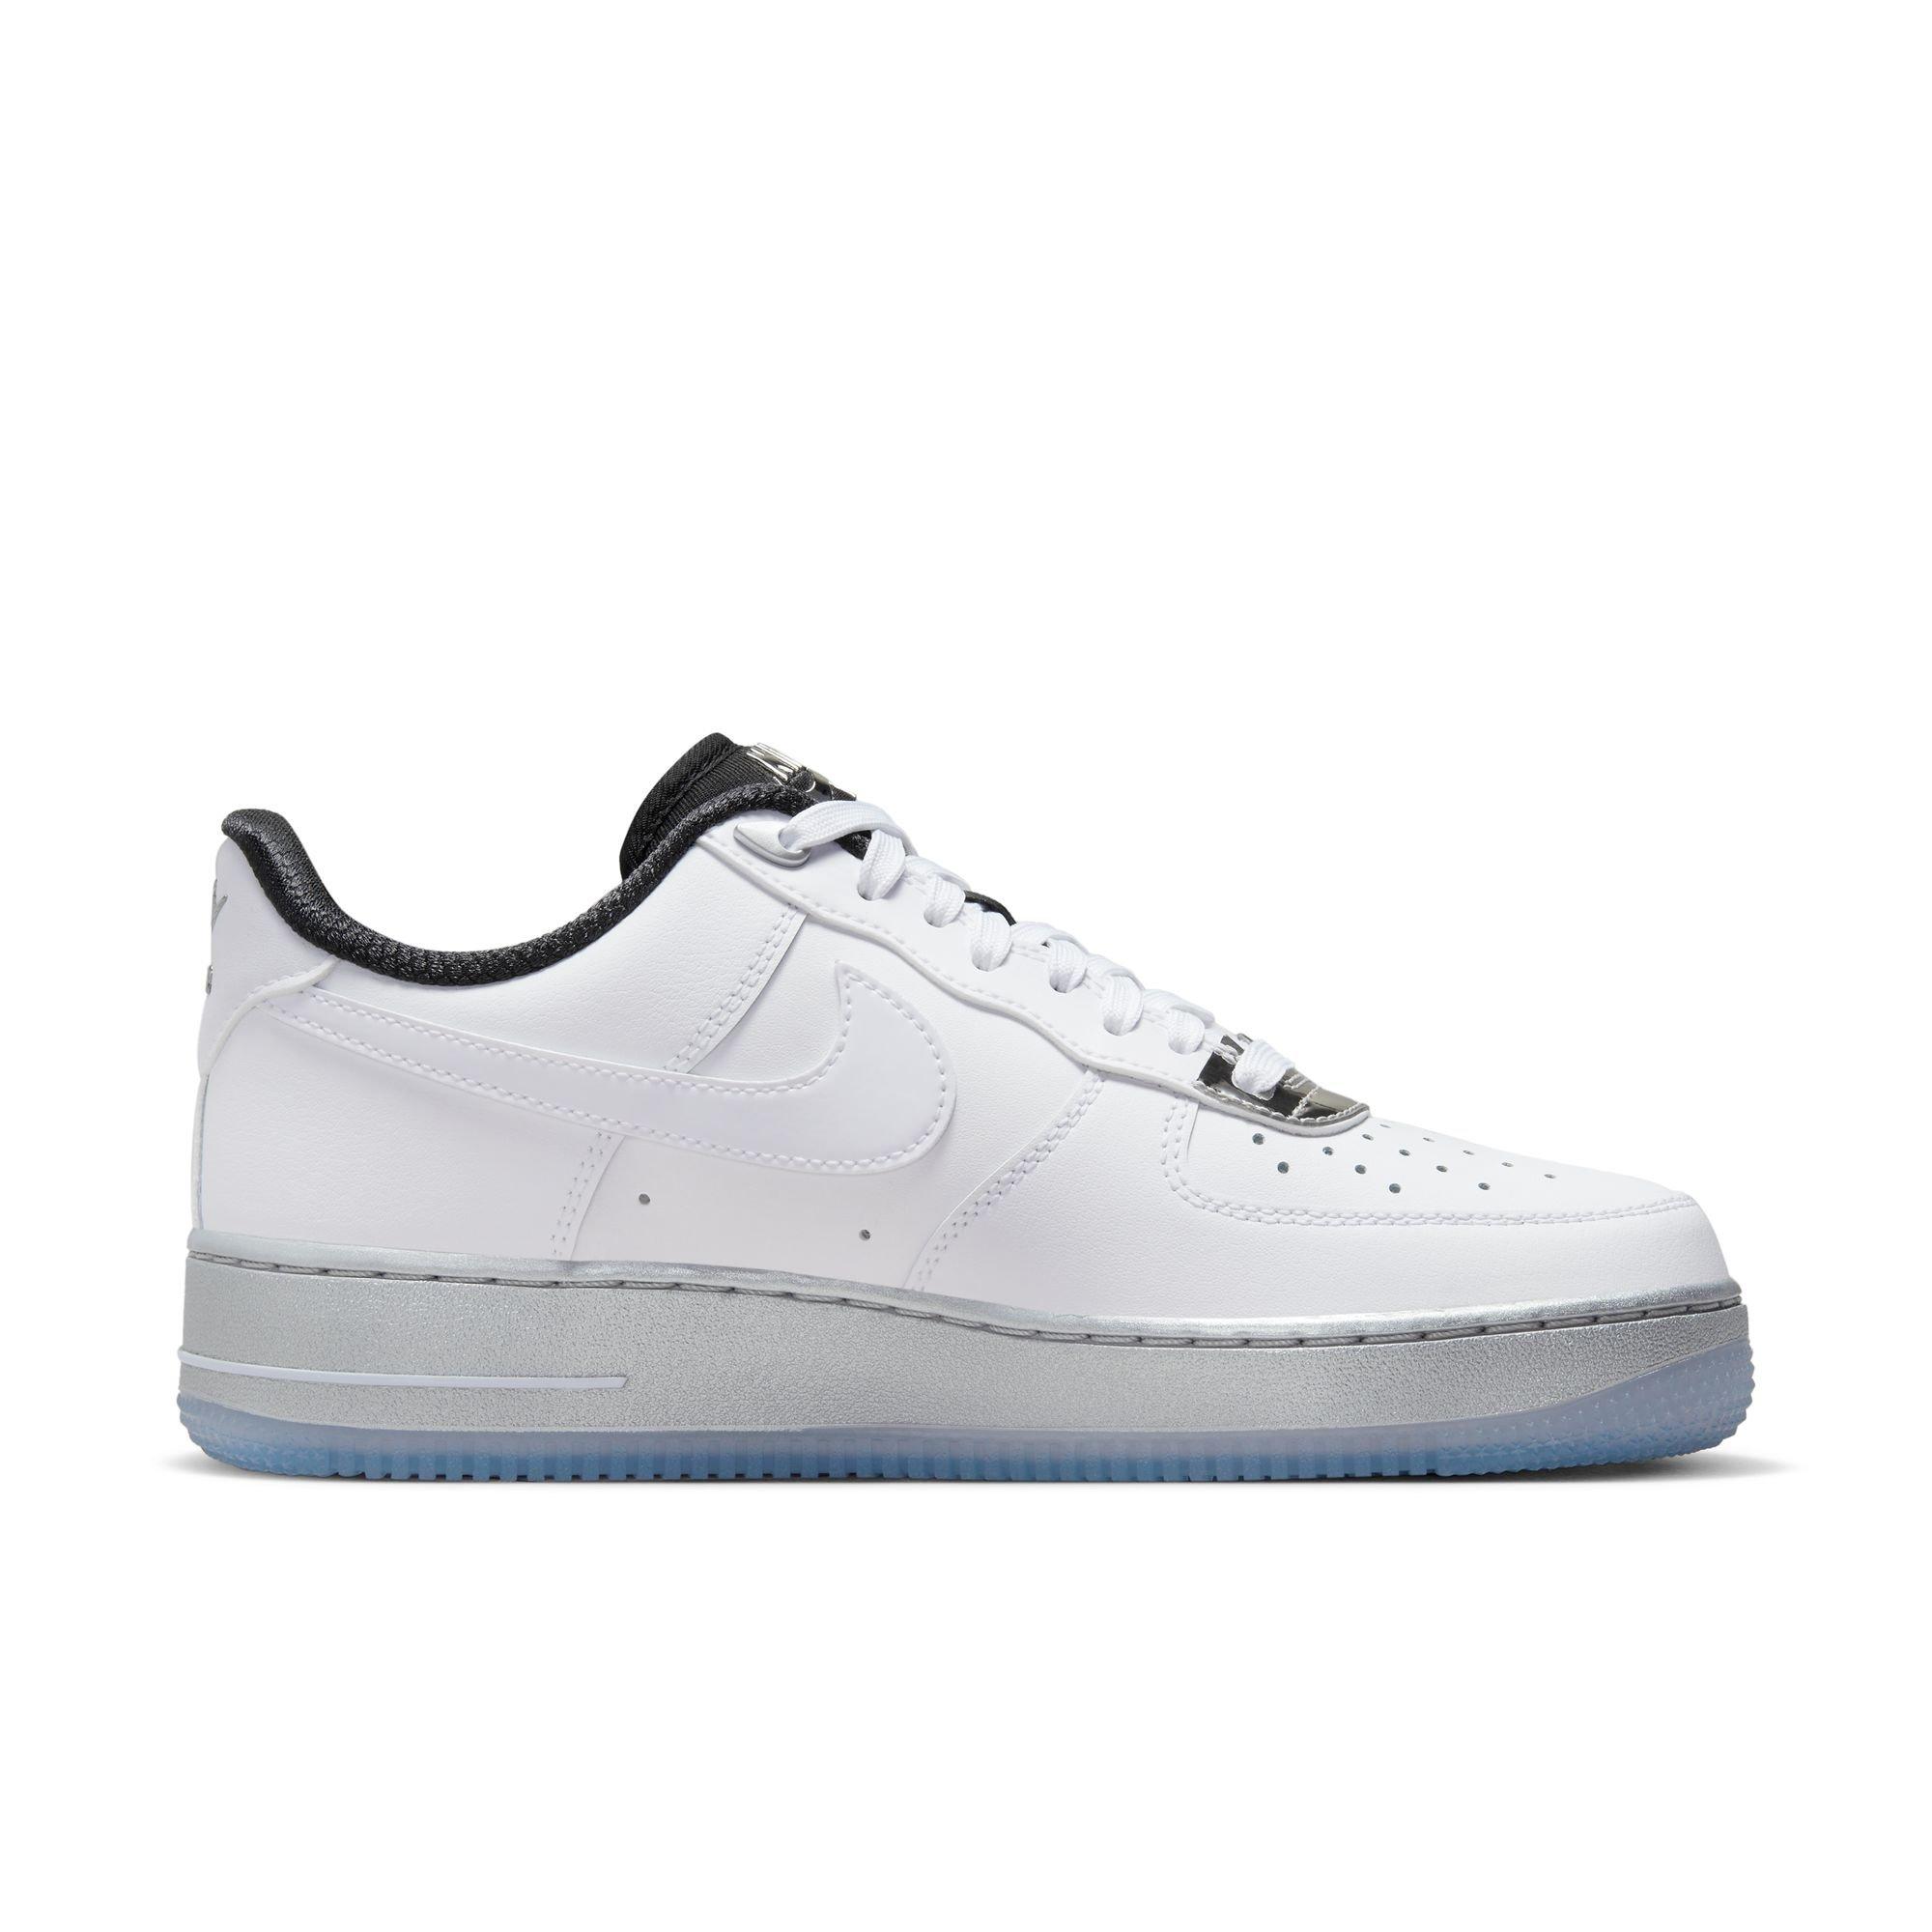 nike air force 1 '07 lv8 women's shoes